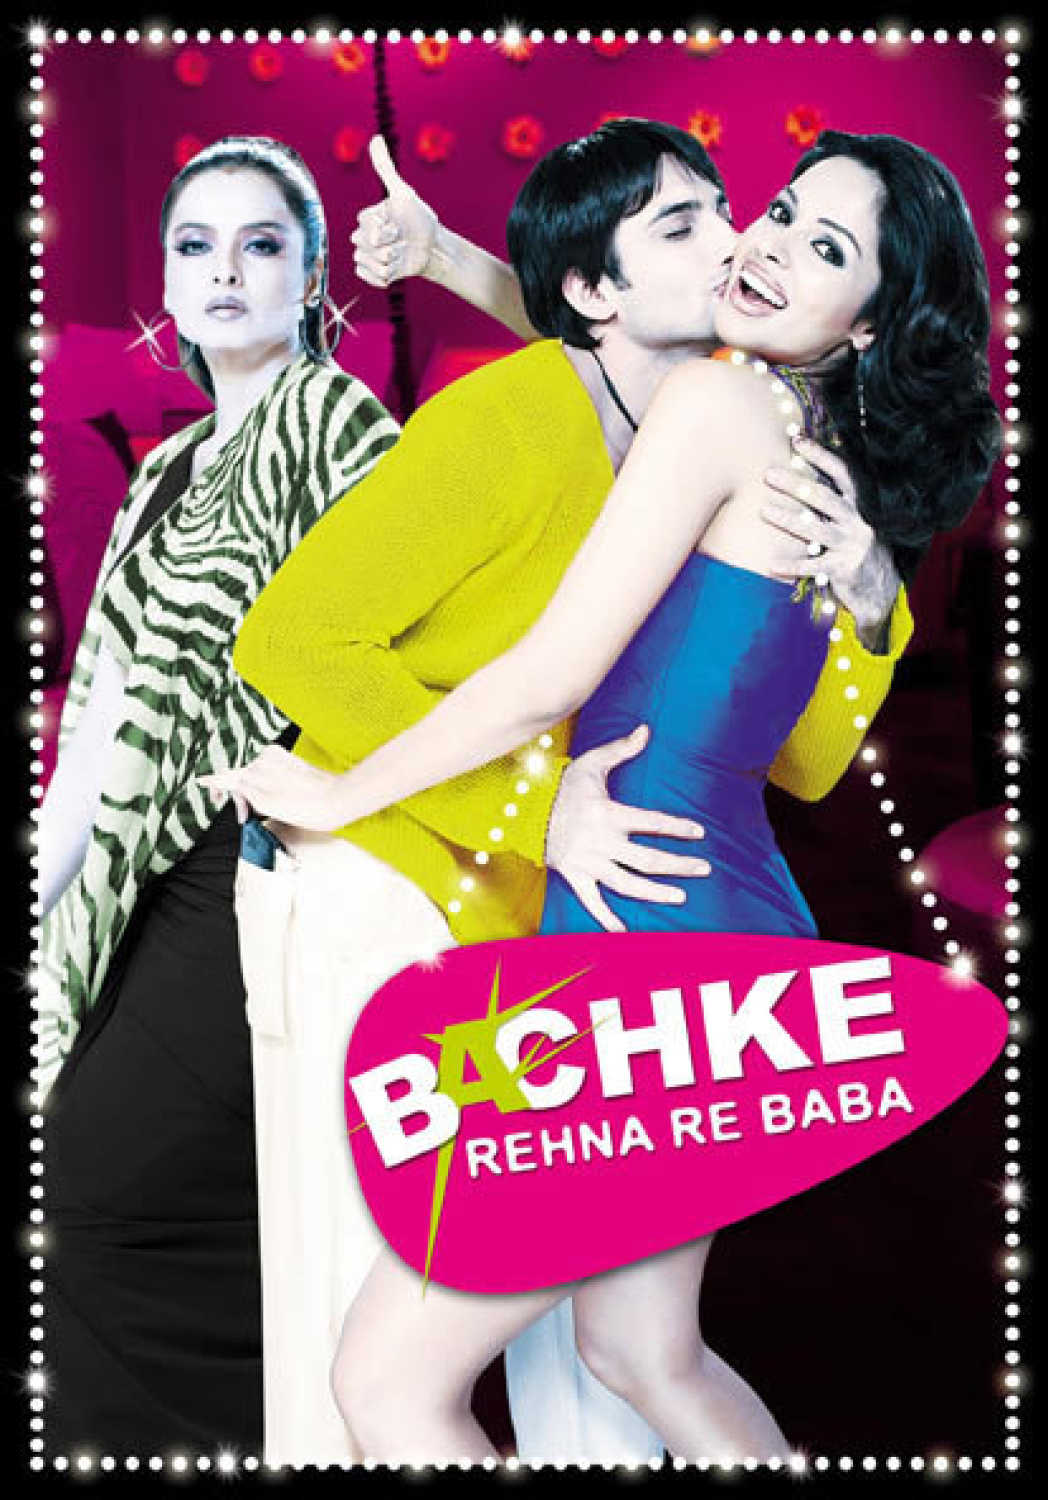 Poster for the movie "Bachke Rehna Re Baba"